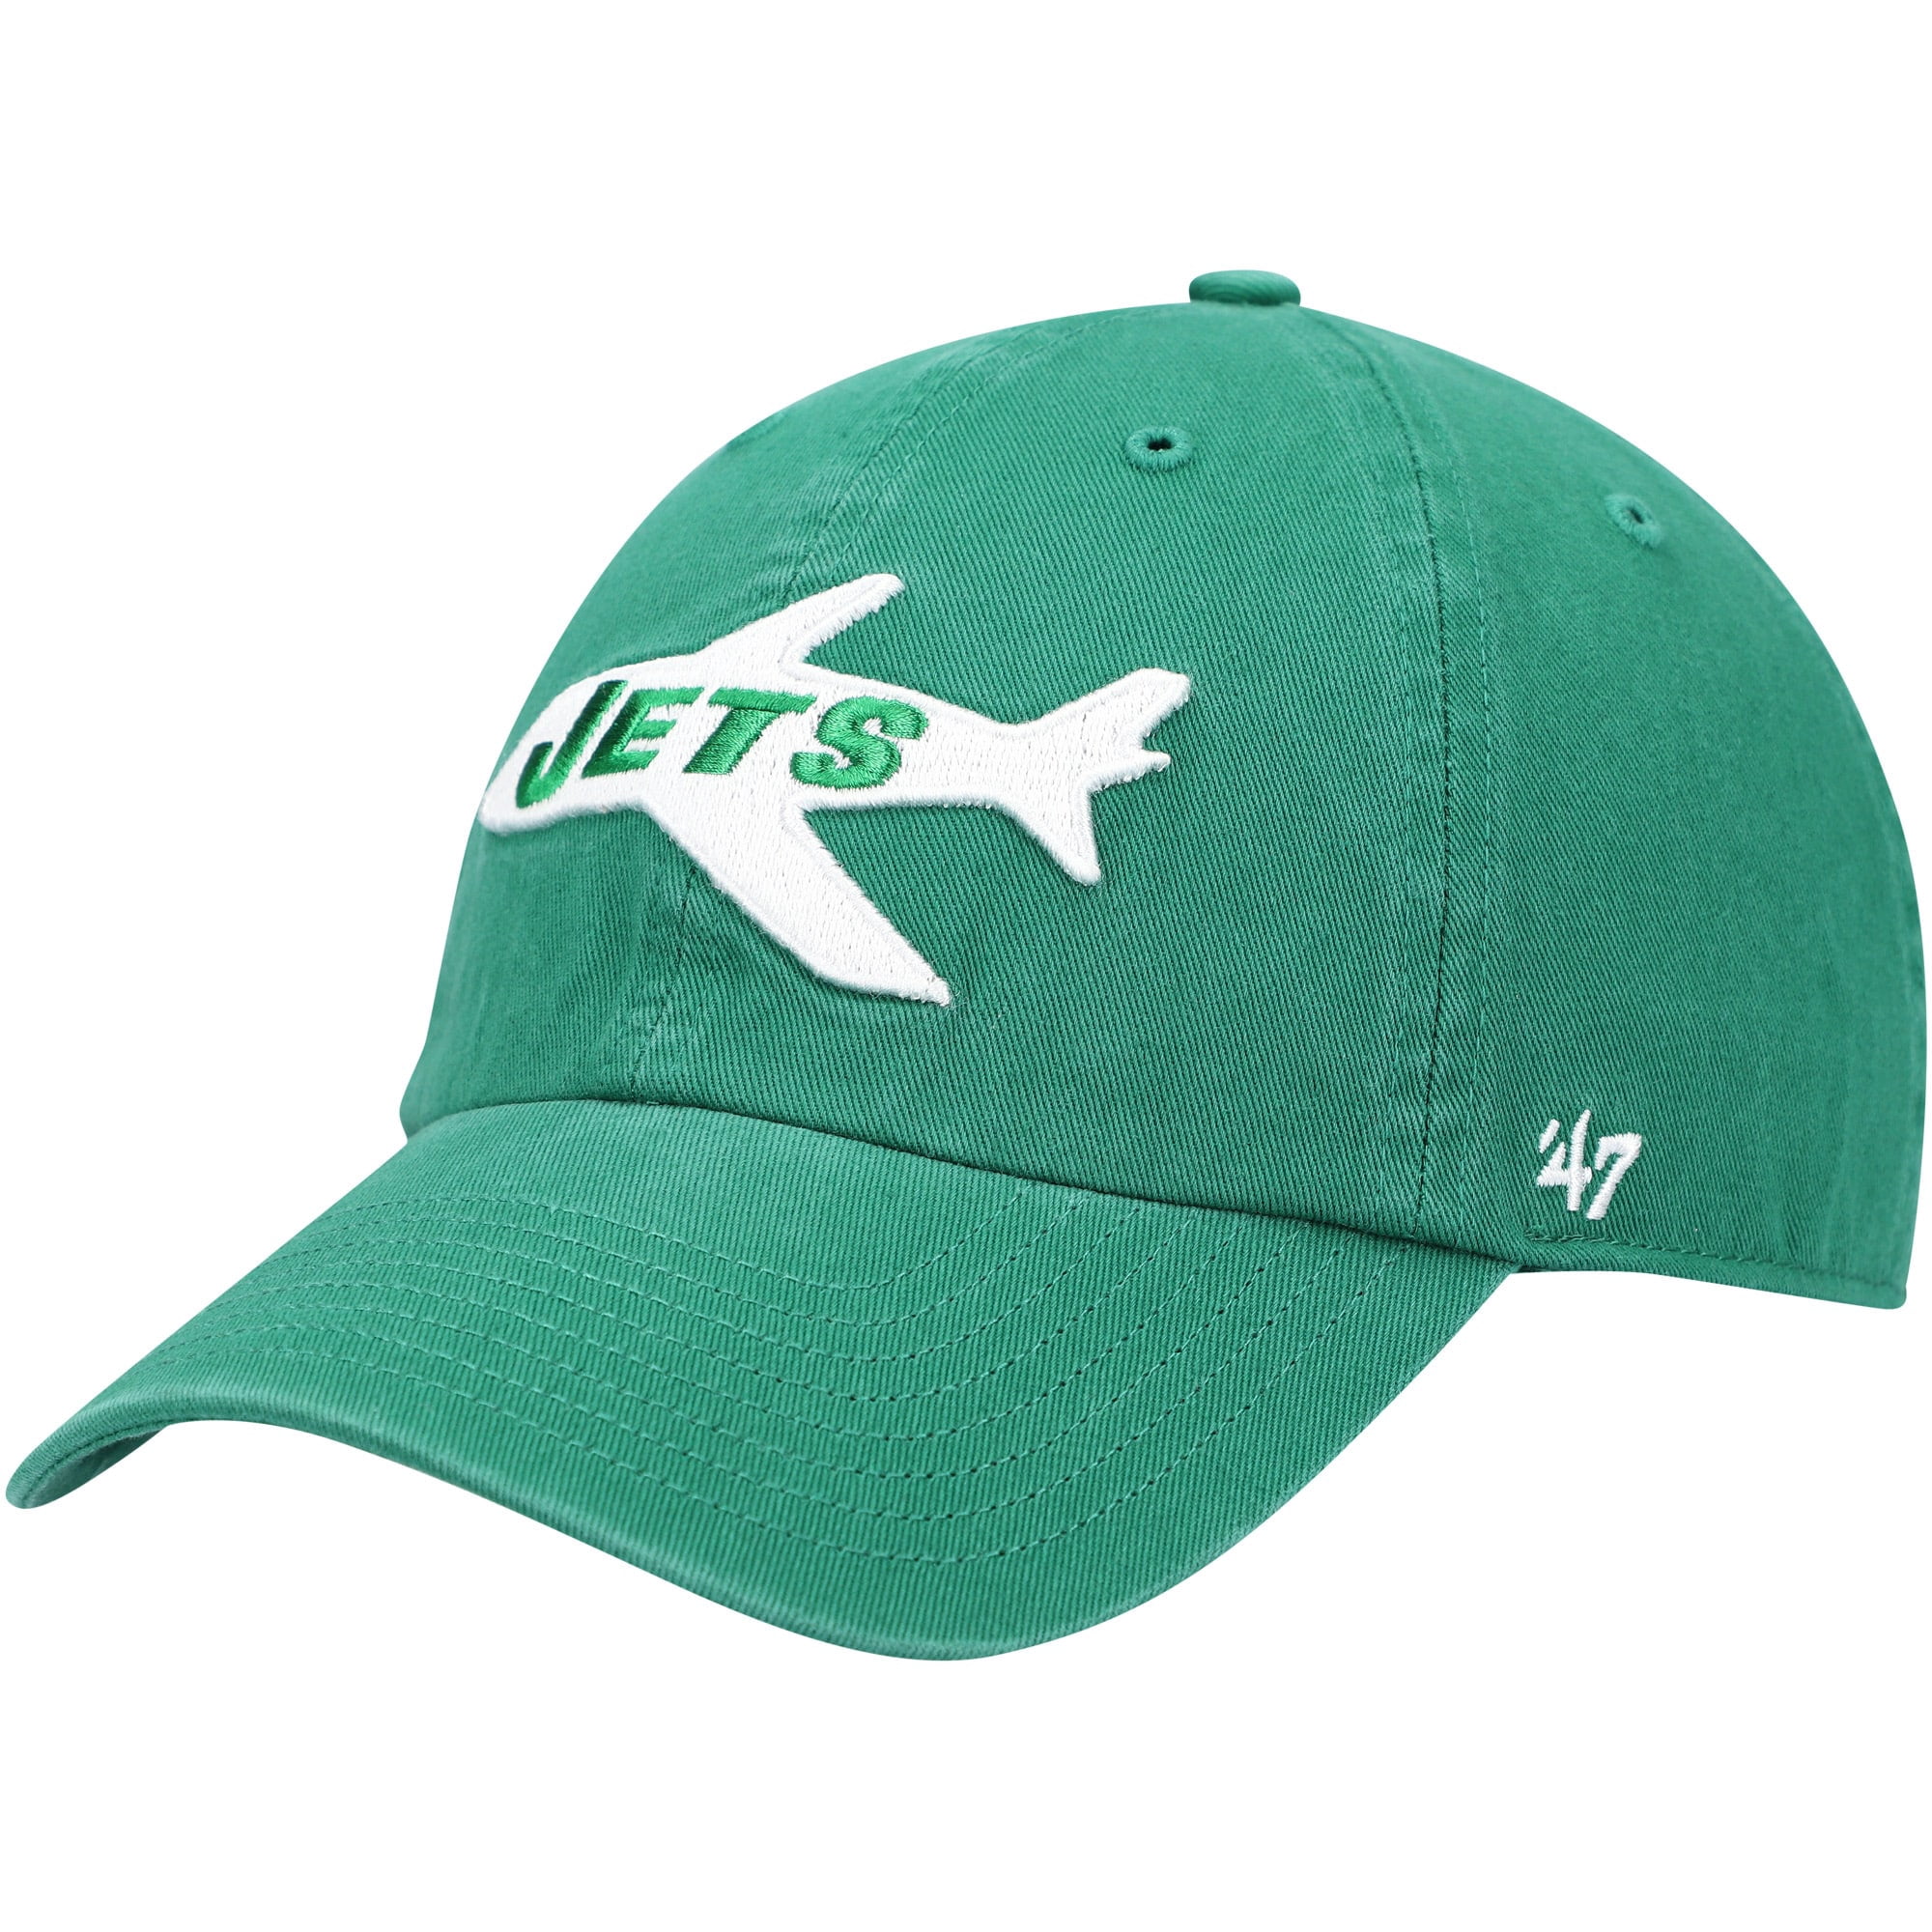 Men's '47 Green New York Jets Clean Up Legacy Adjustable Hat - OSFA 